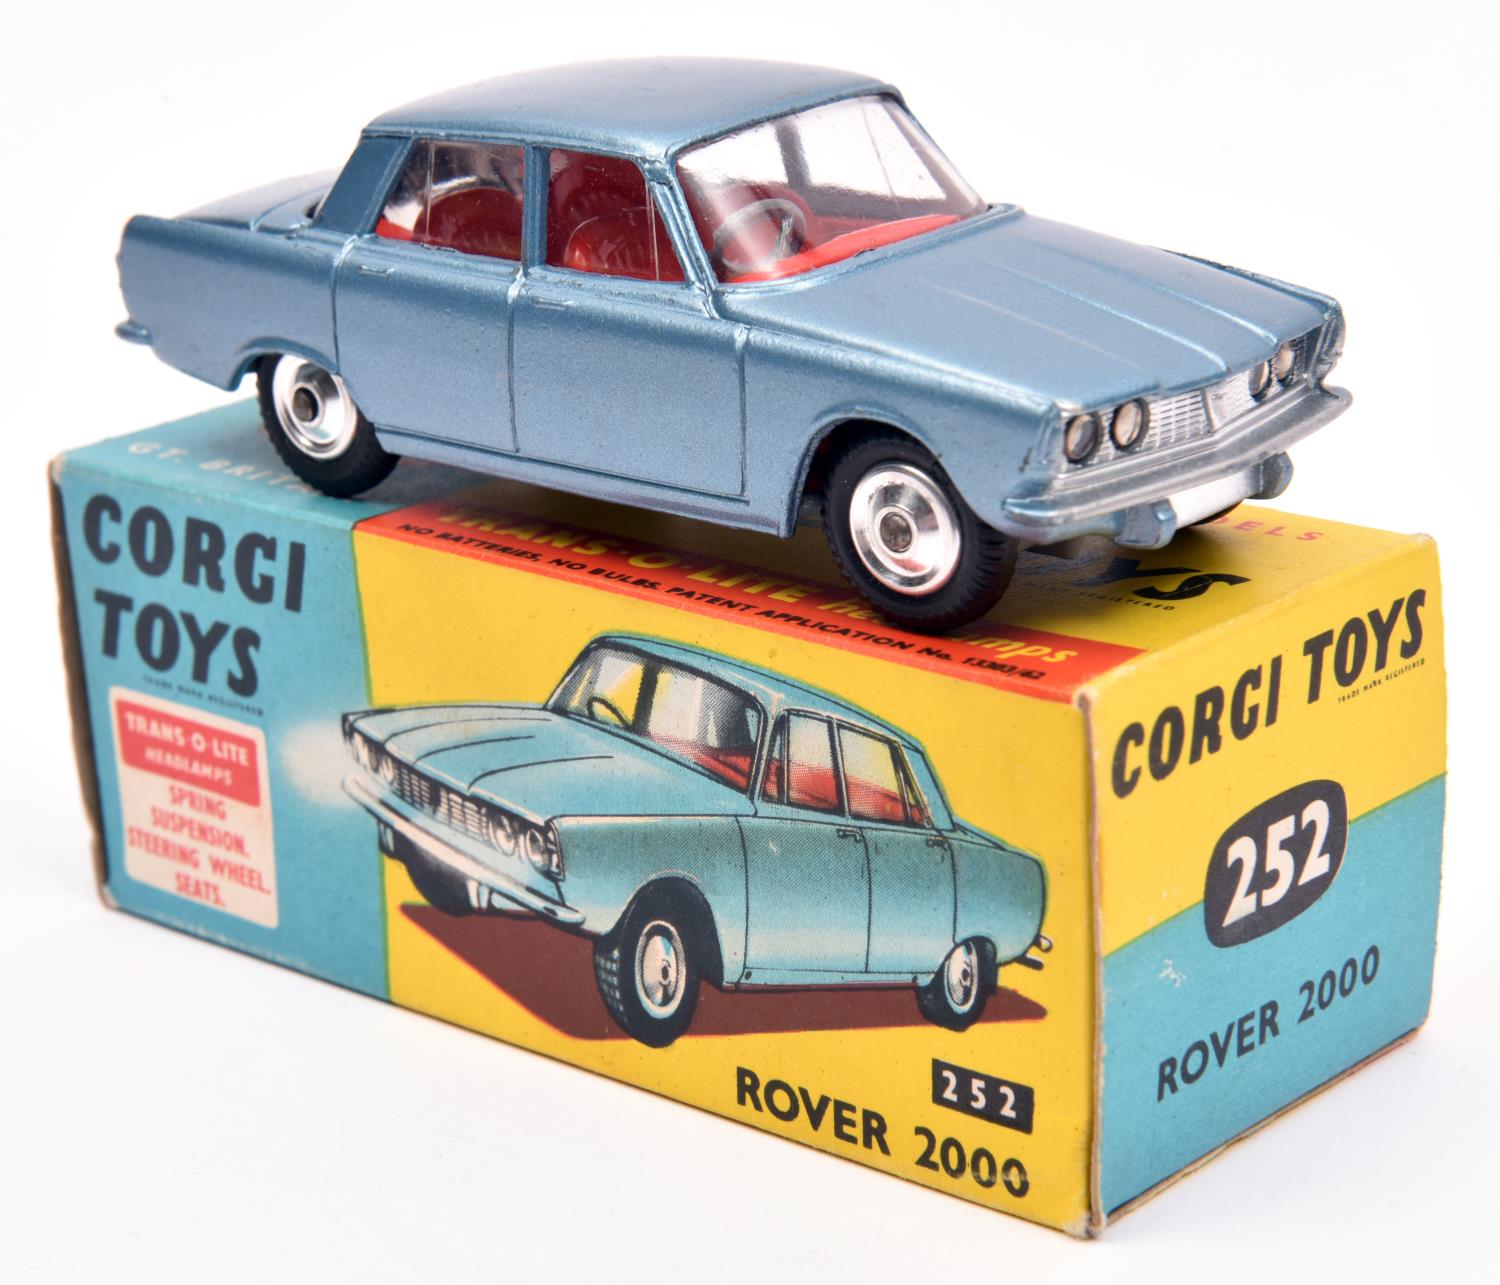 Corgi Toys Rover 2000 (252). In light metallic blue with red interior, dished spun wheels with black